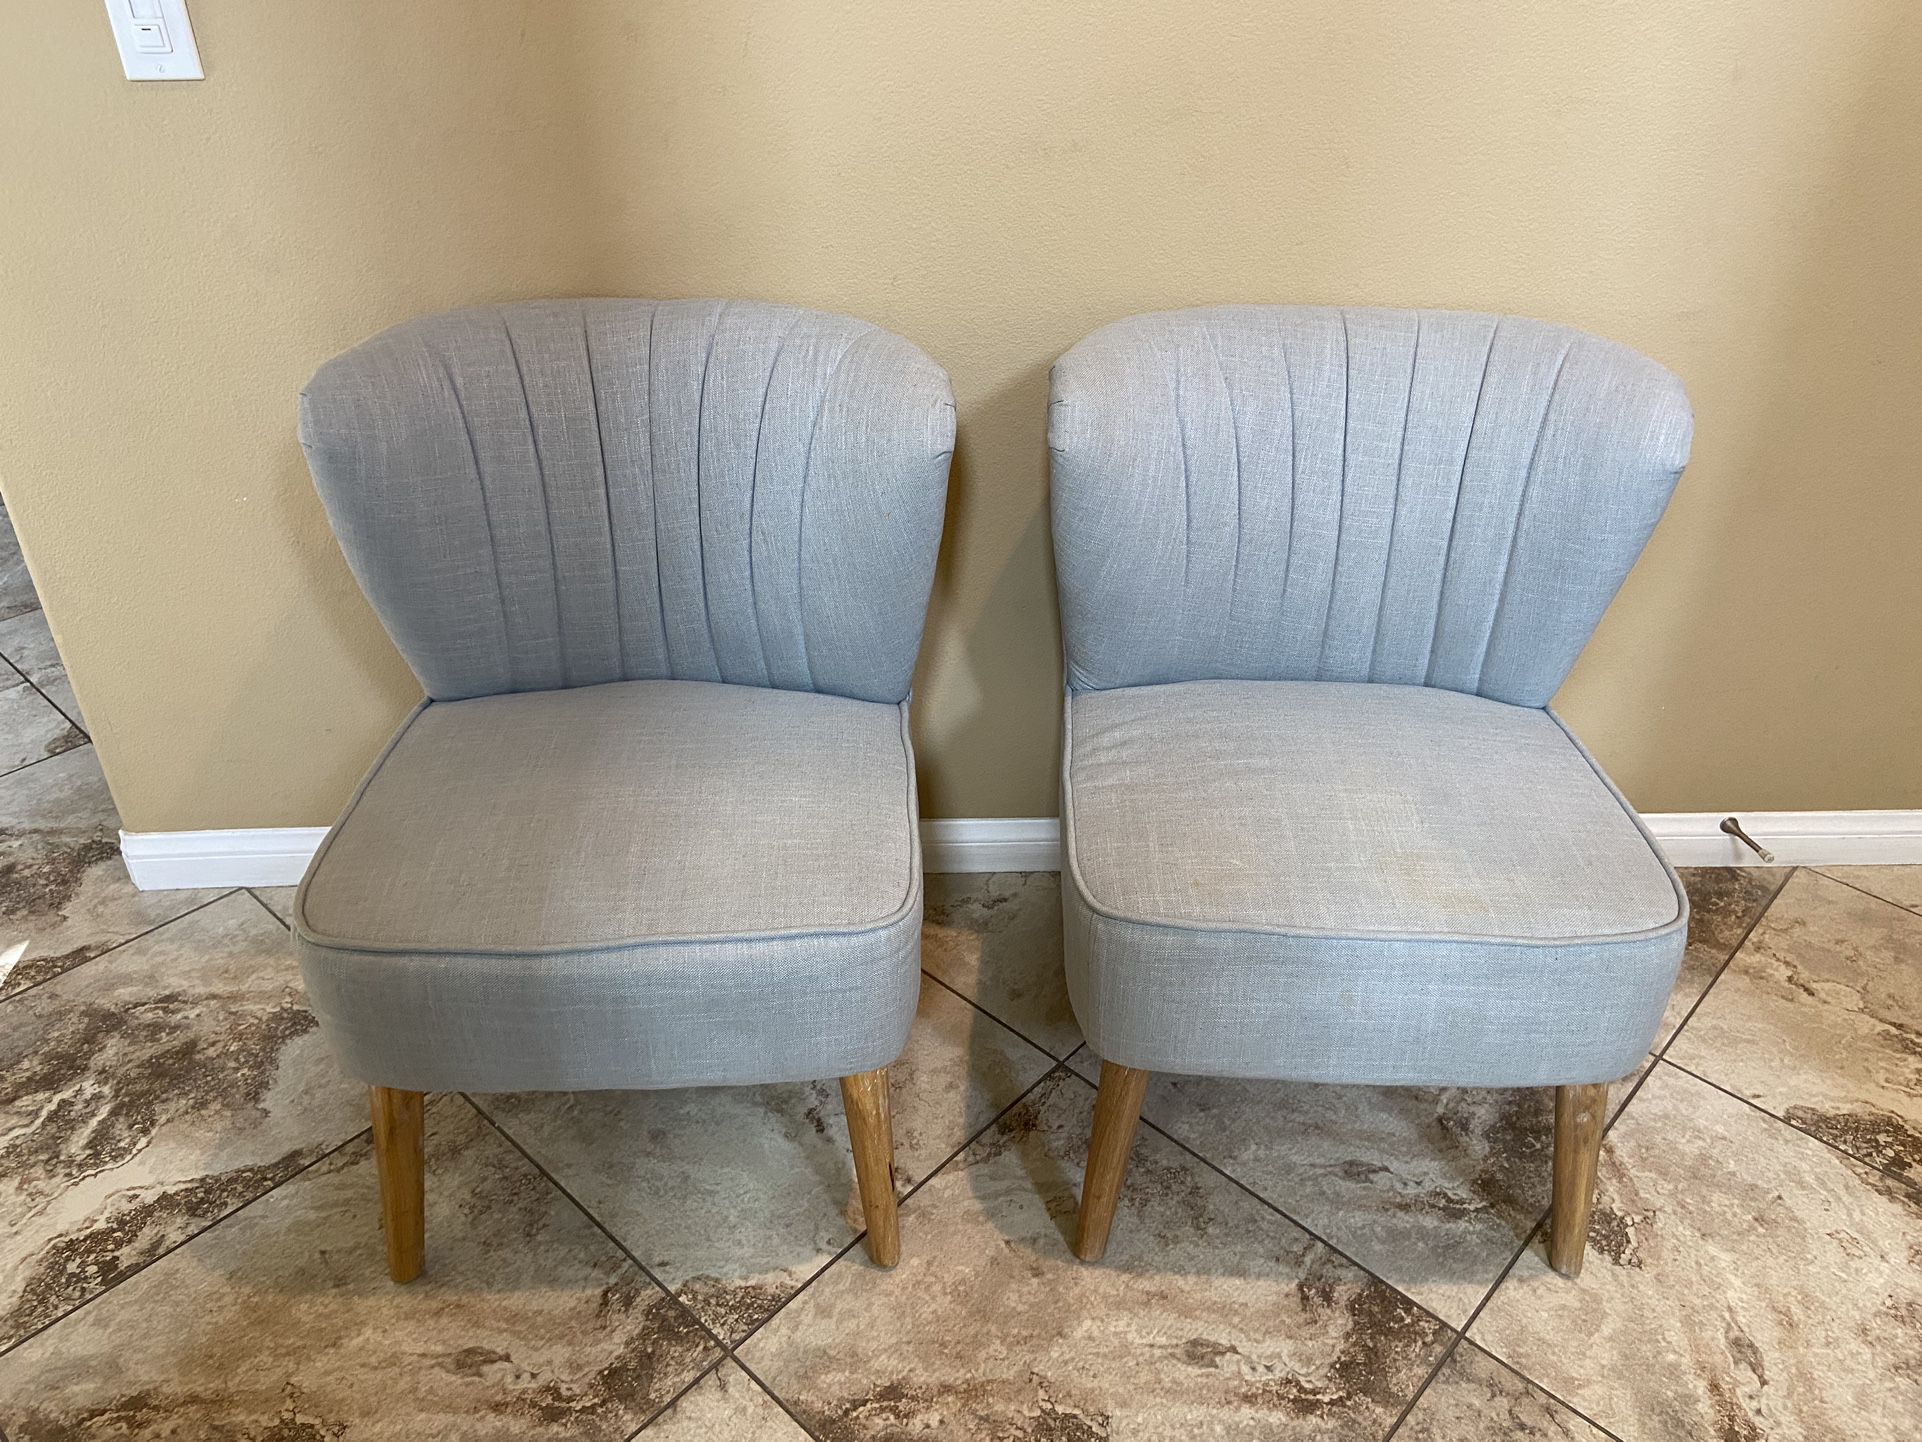 Pair of Side Chairs, Accent chairs